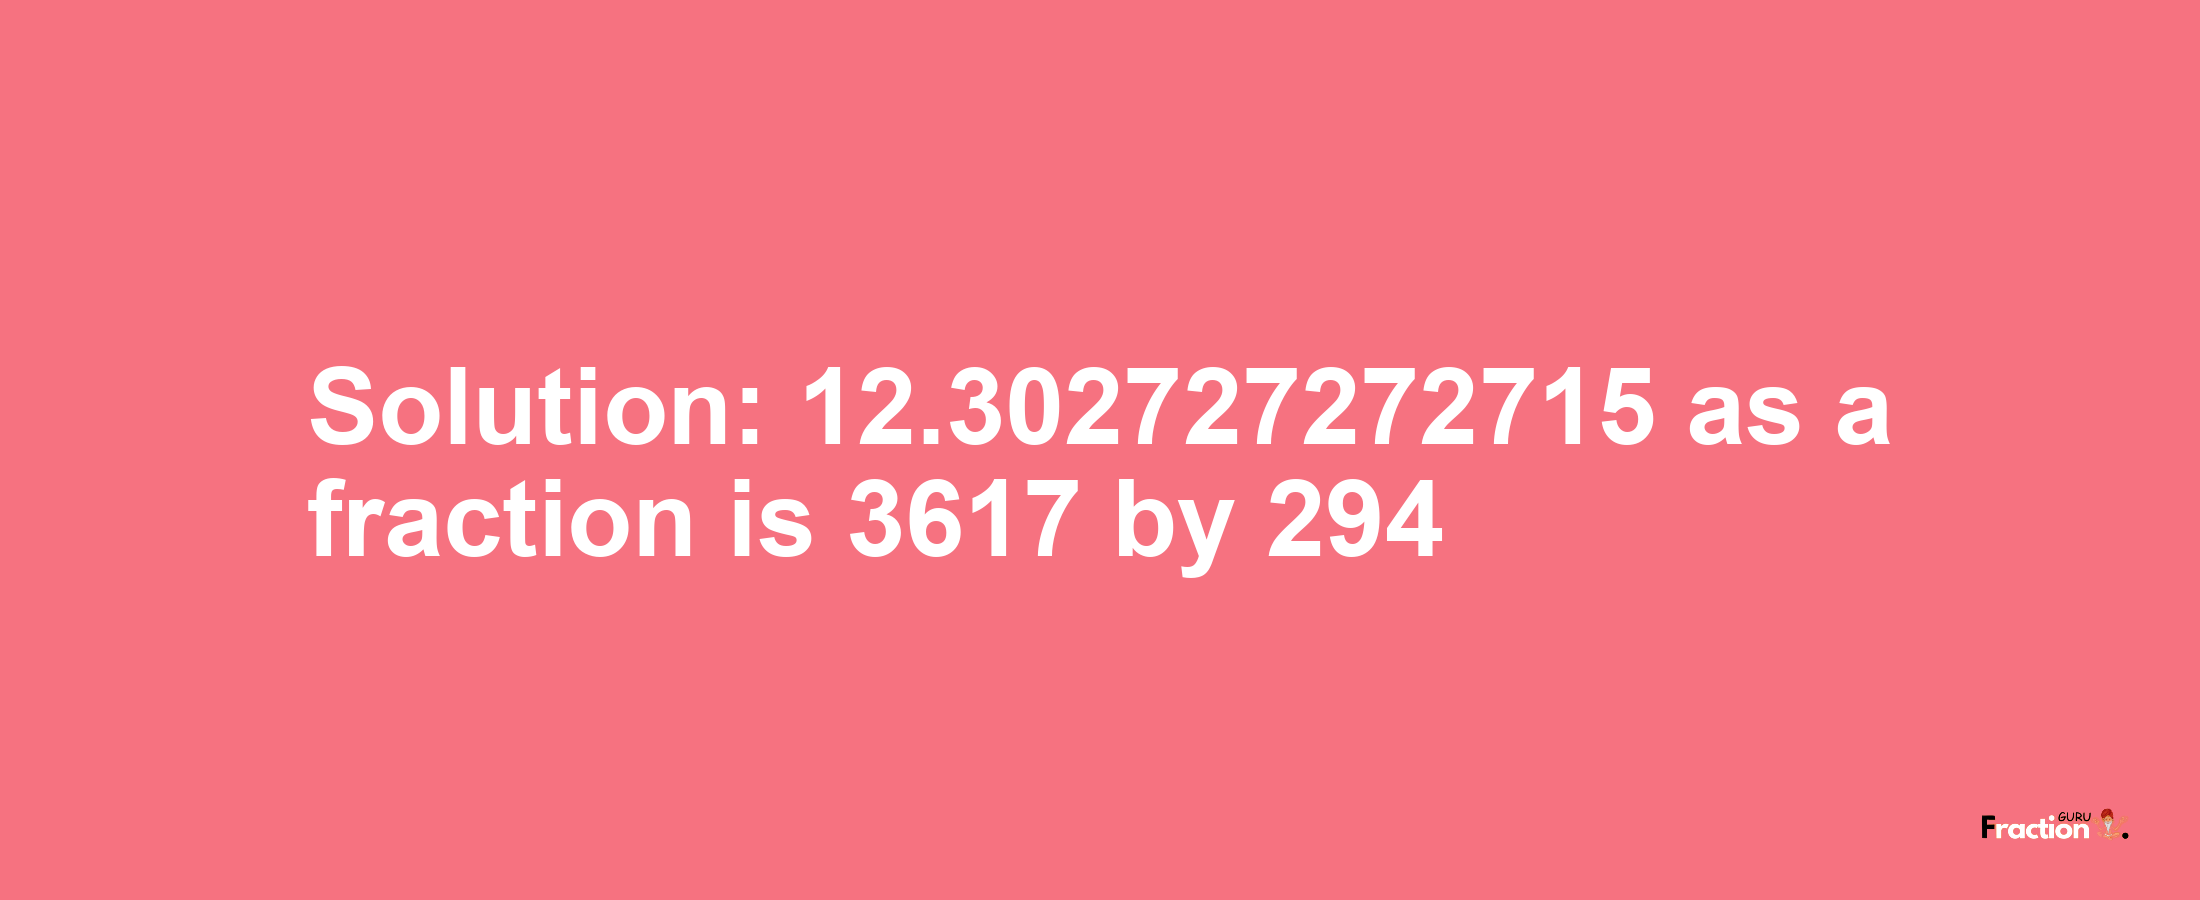 Solution:12.302727272715 as a fraction is 3617/294